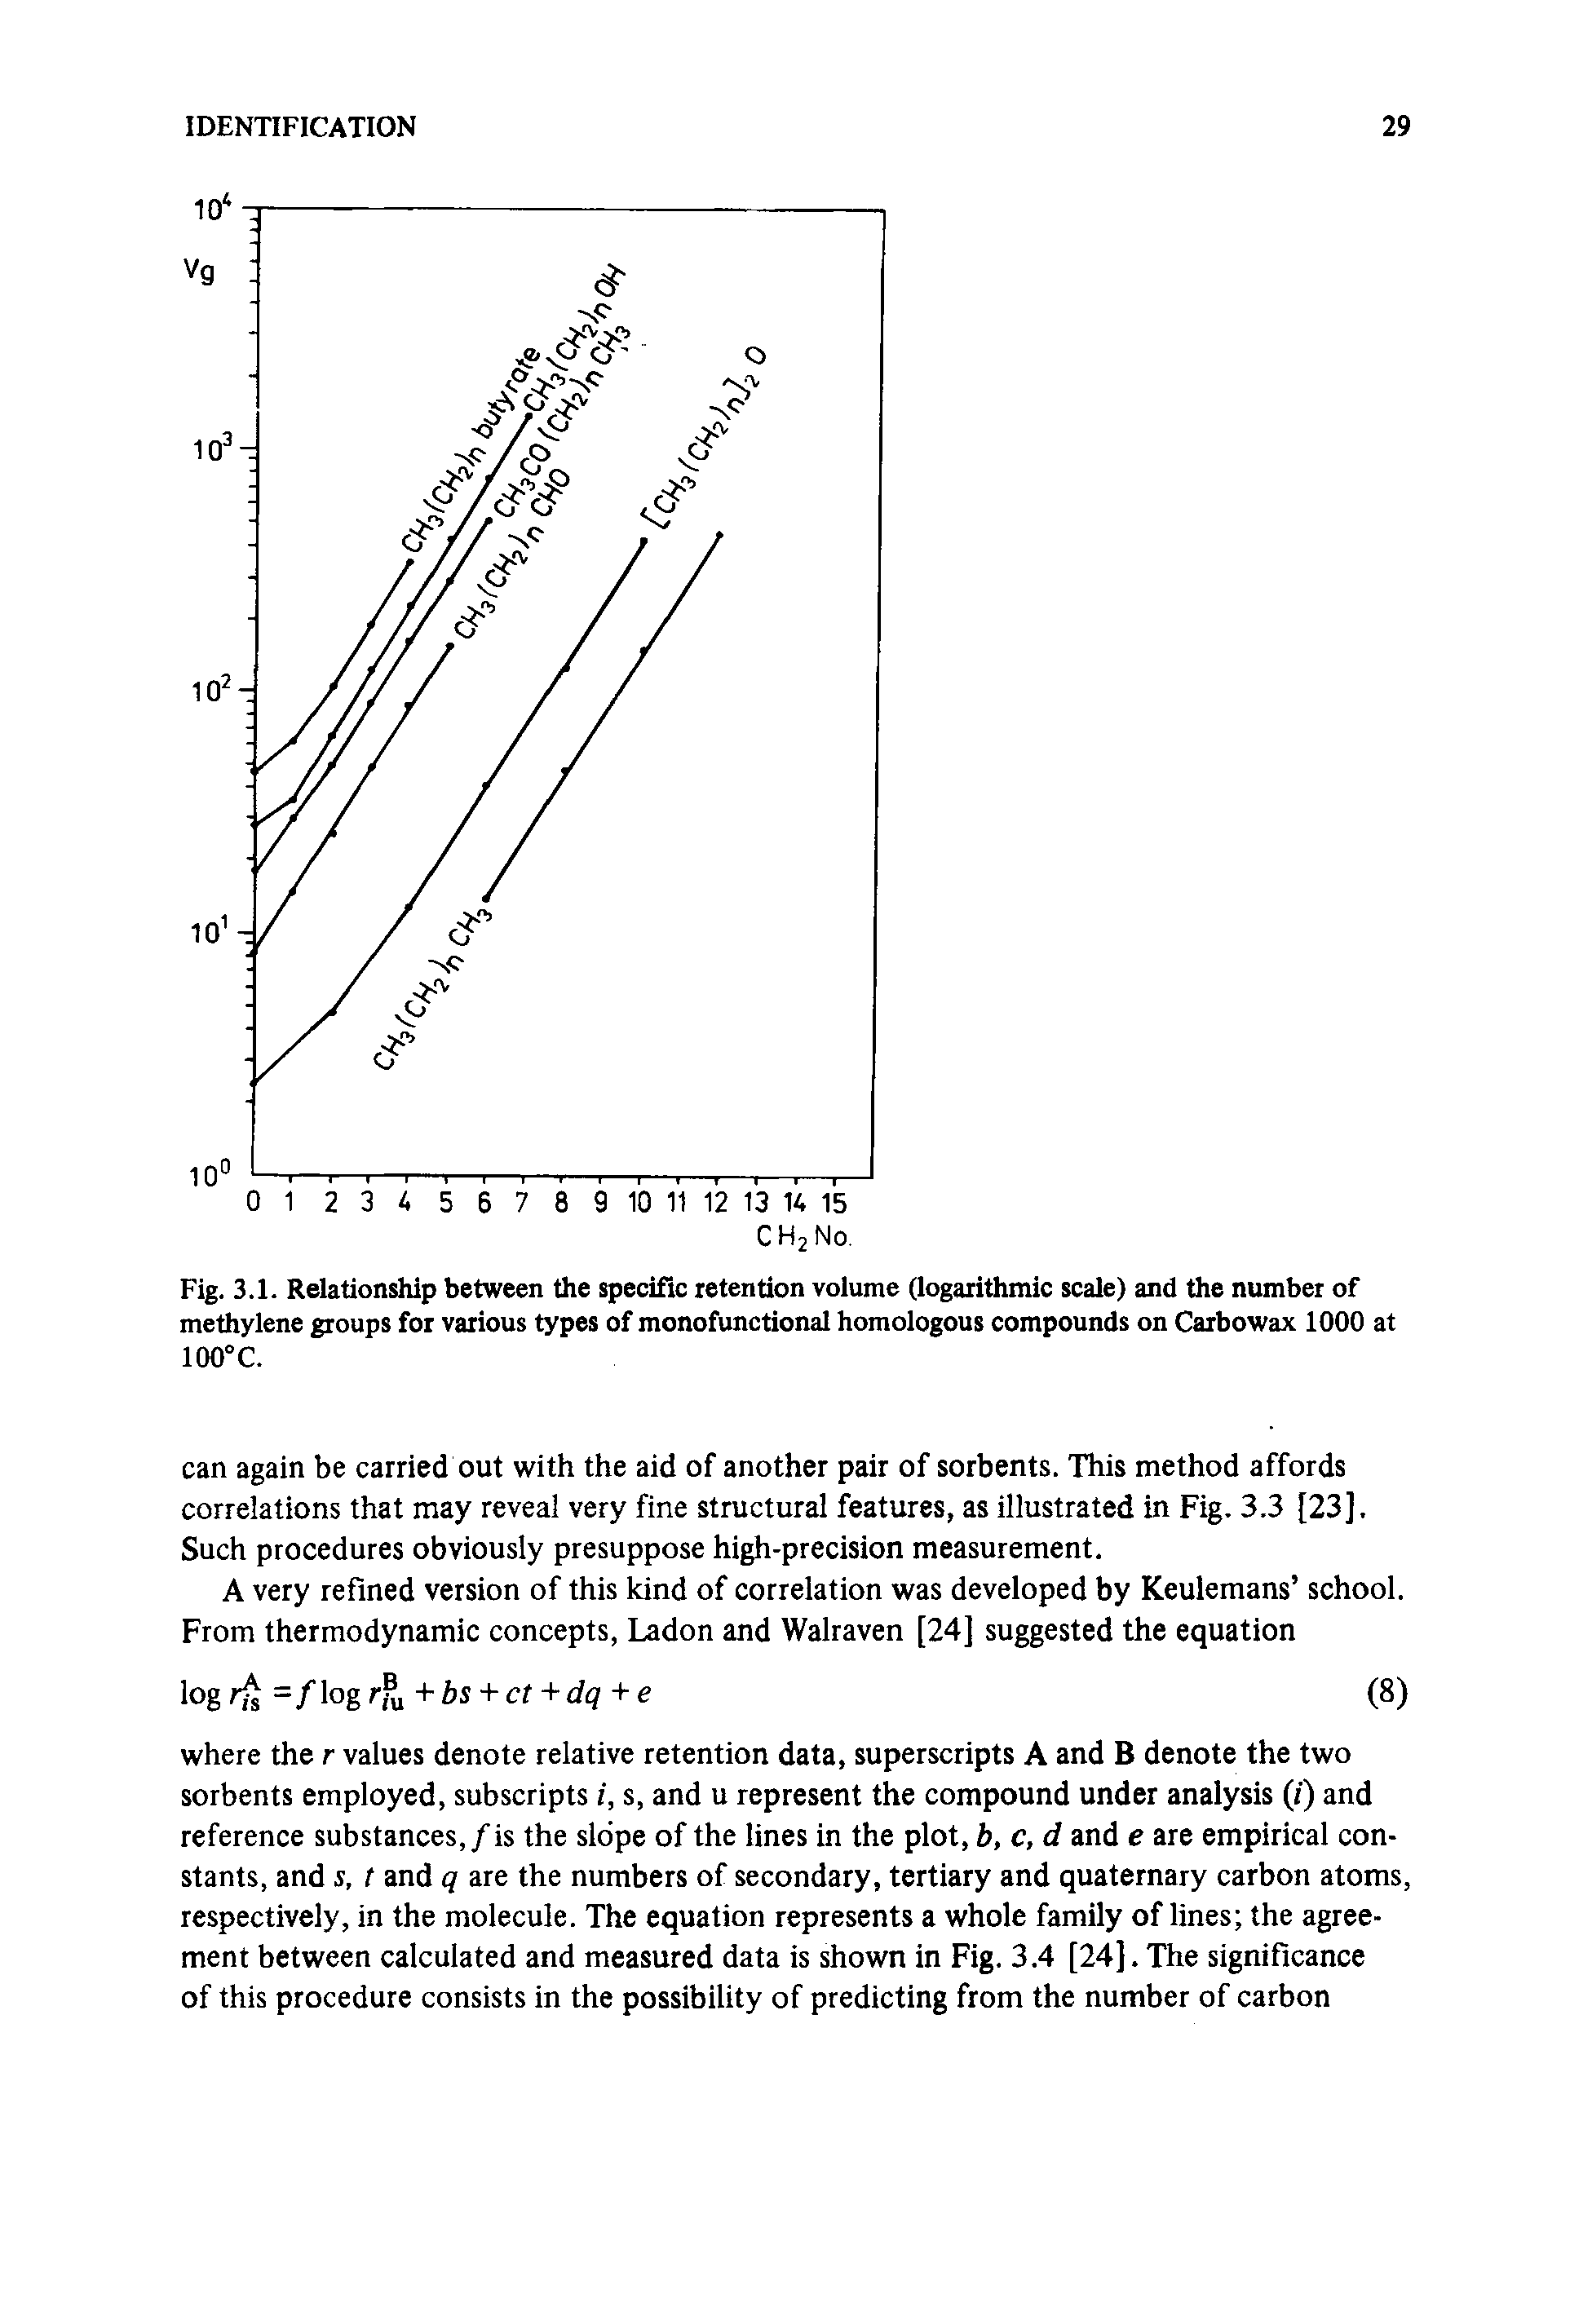 Fig. 3.1. Relationship between the specific retention volume (logarithmic scale) and the number of methylene groups for various types of monofunctional homologous compounds on Caibowax 1000 at 100°C.